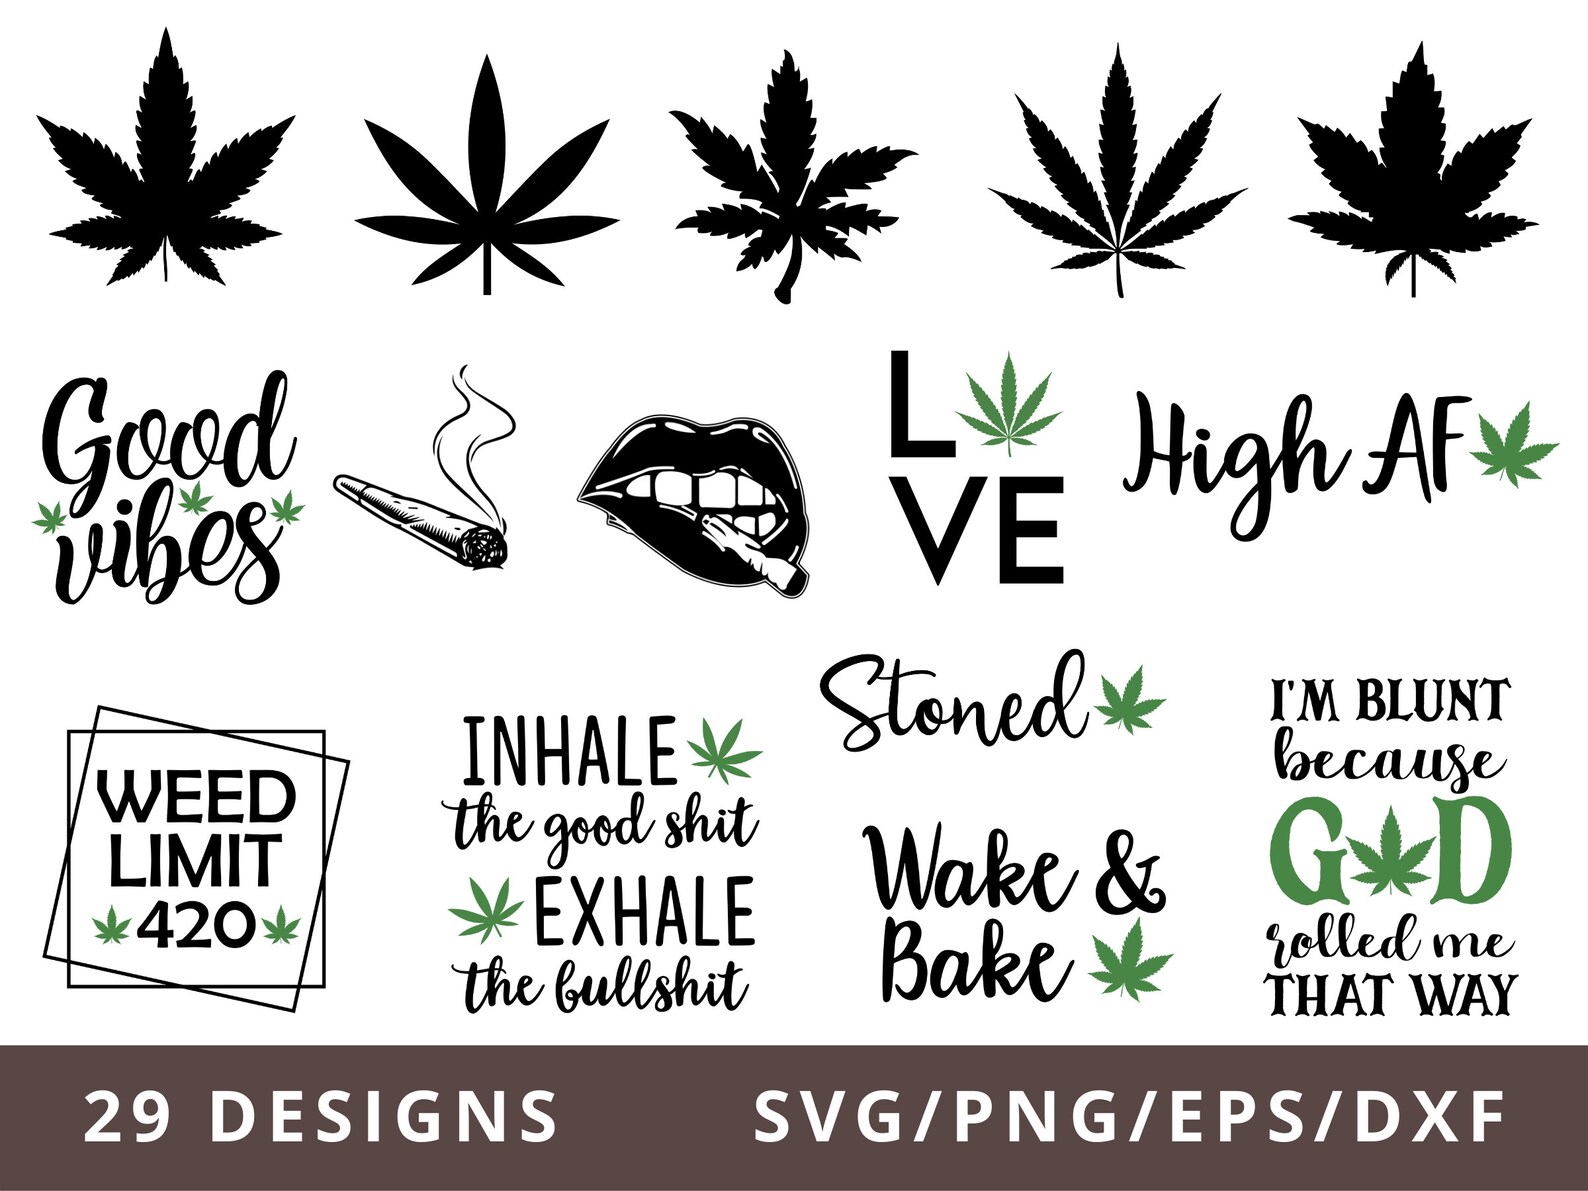 Illustrations for weed project.